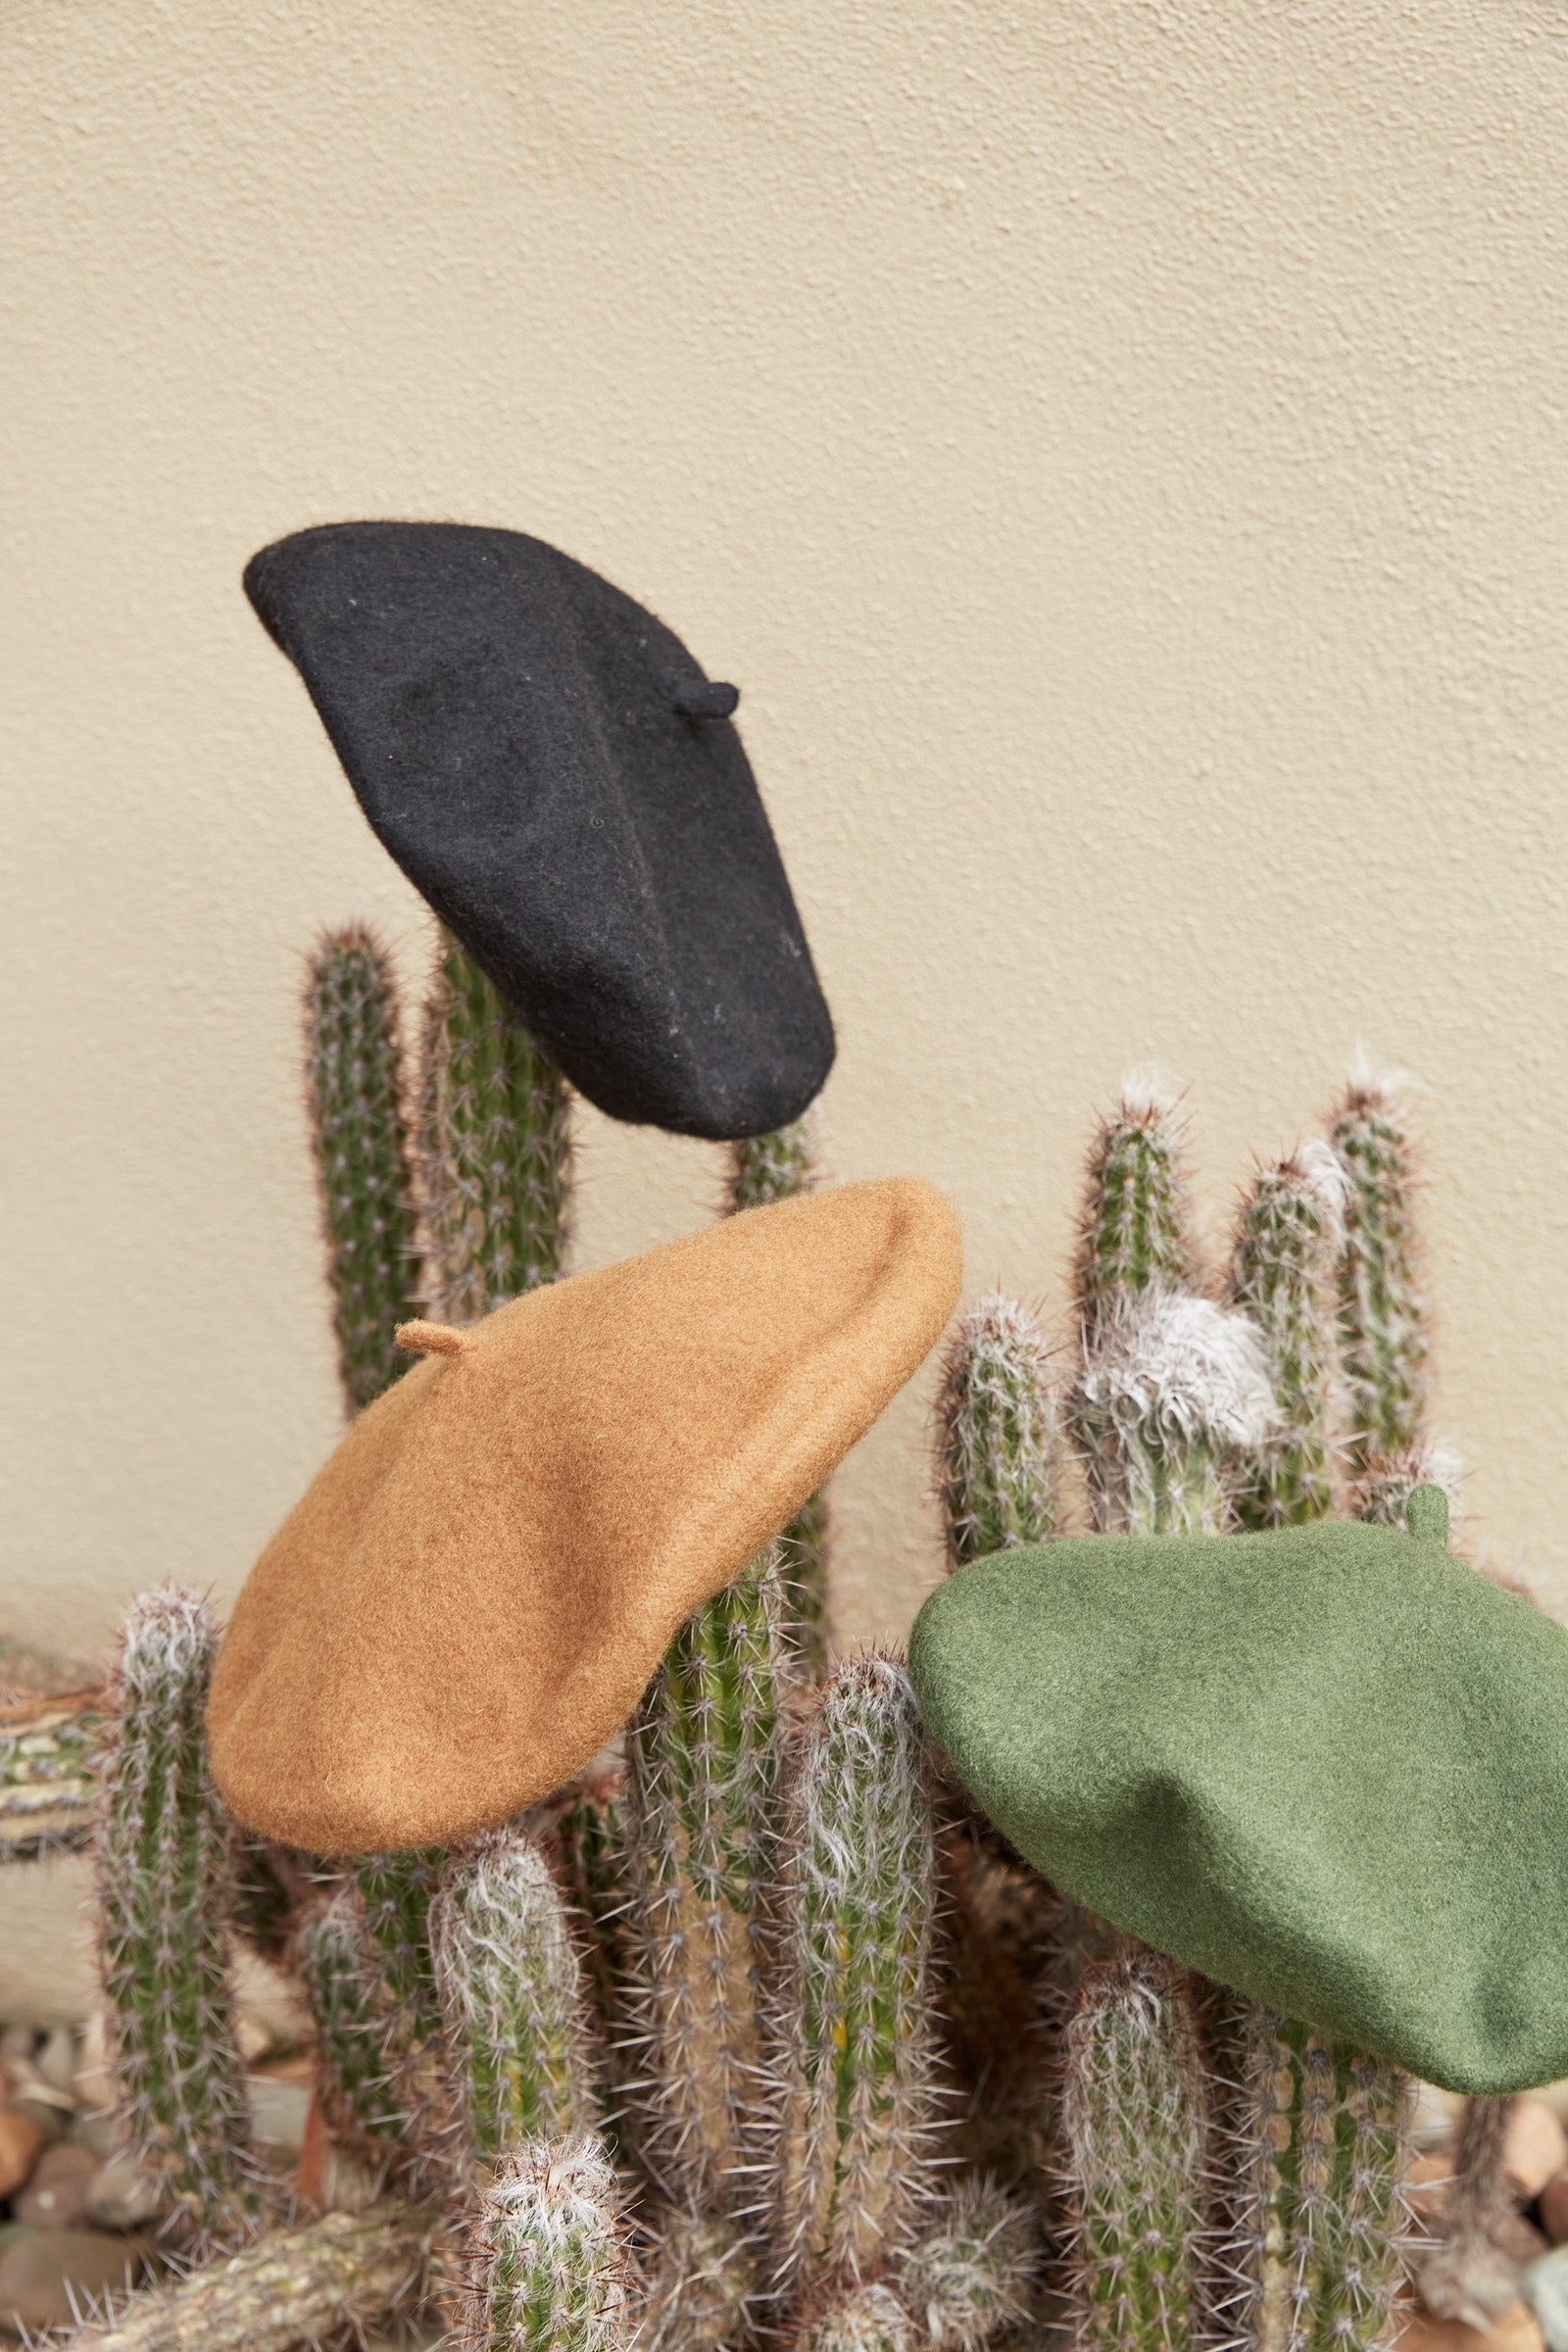 Paarl Beret - Moss - eb&ive Hat